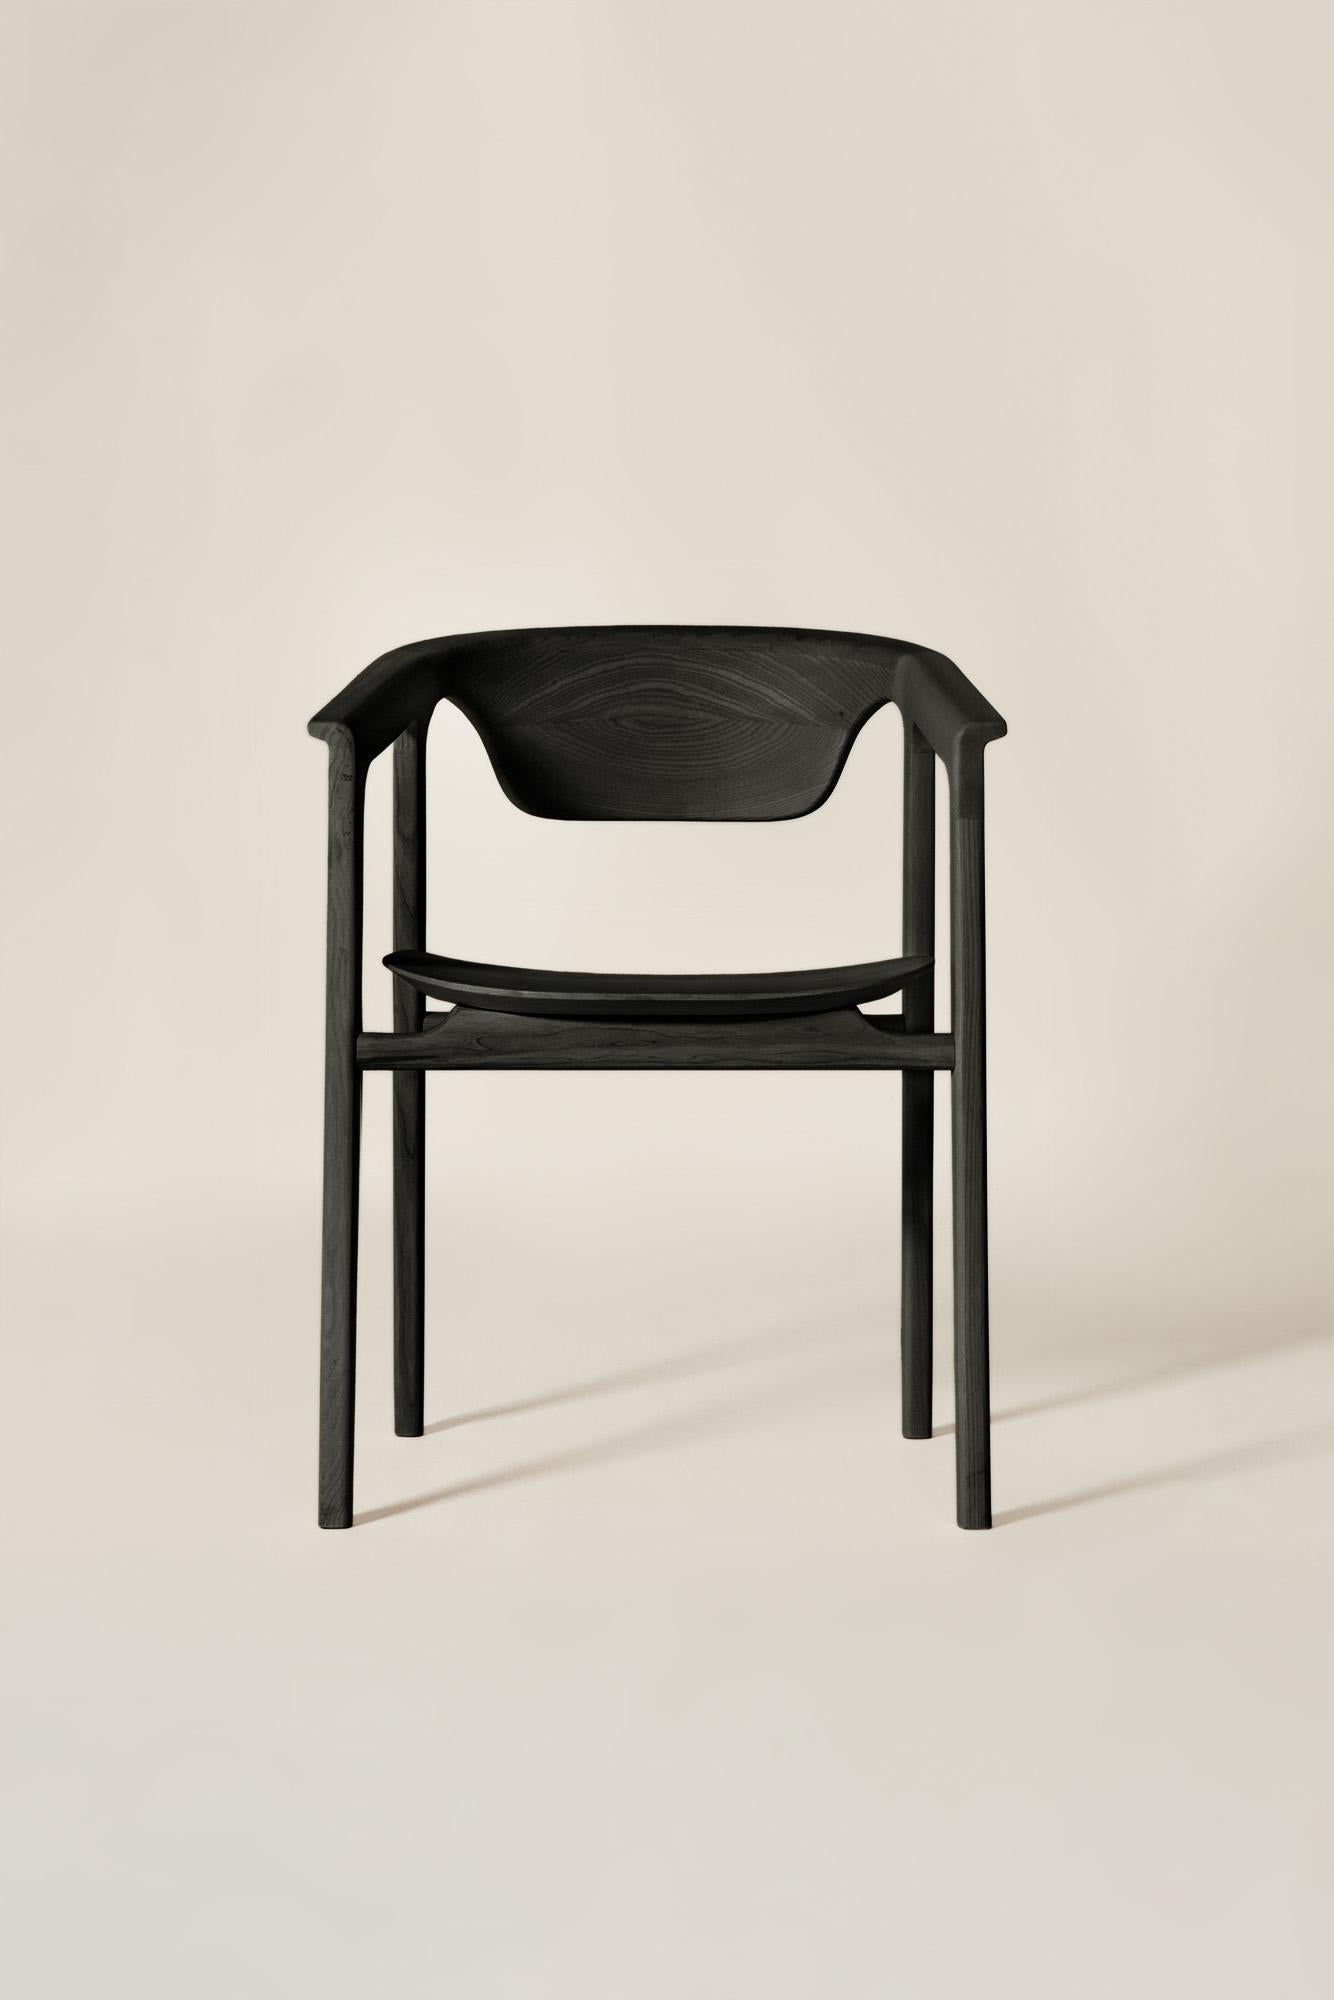 European Duna Solid Wood Chair, Ash in Handmade Black Finish, Contemporary For Sale